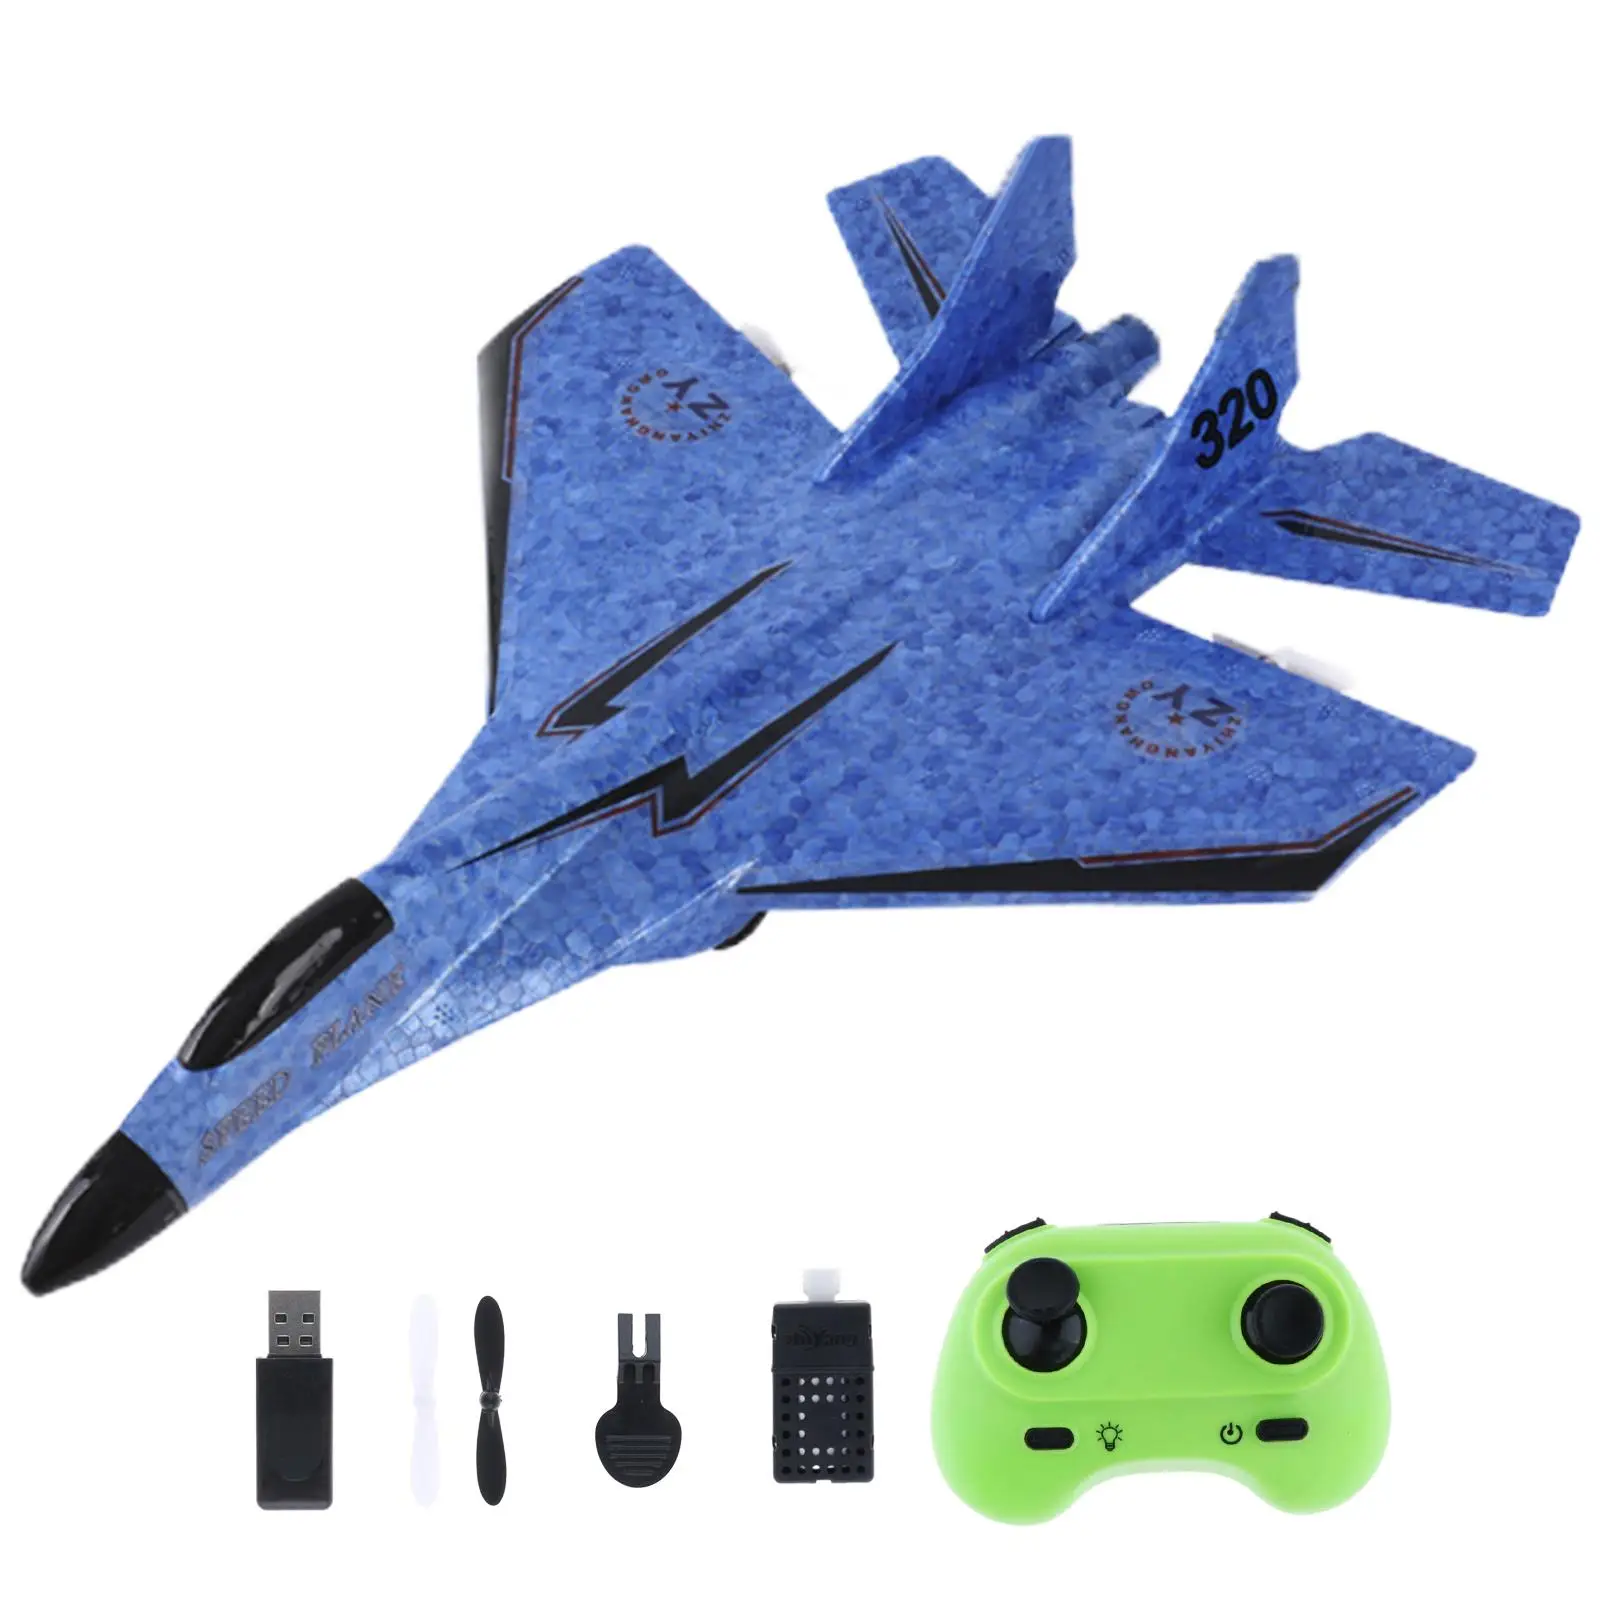 RC 2.4G Easy to Control Outdoor Flighting Toys RC Glider Aircraft Foam RC Airplane for Kids Beginner Adults Boys Girls